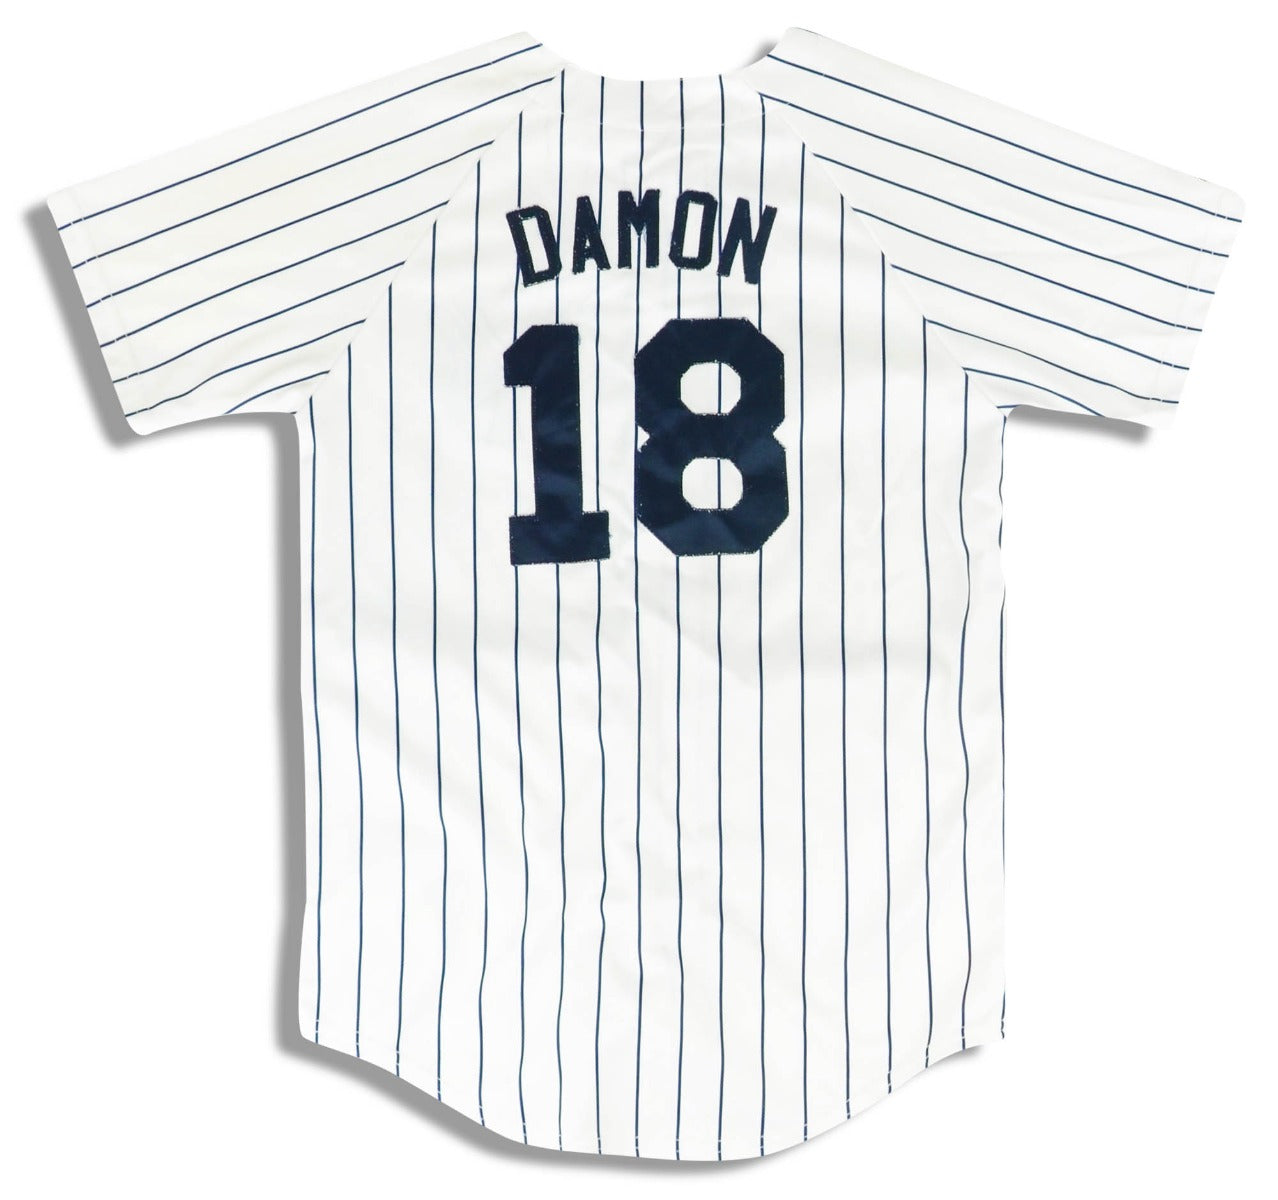 2004 BOSTON RED SOX DAMON #18 MAJESTIC JERSEY (HOME) Y